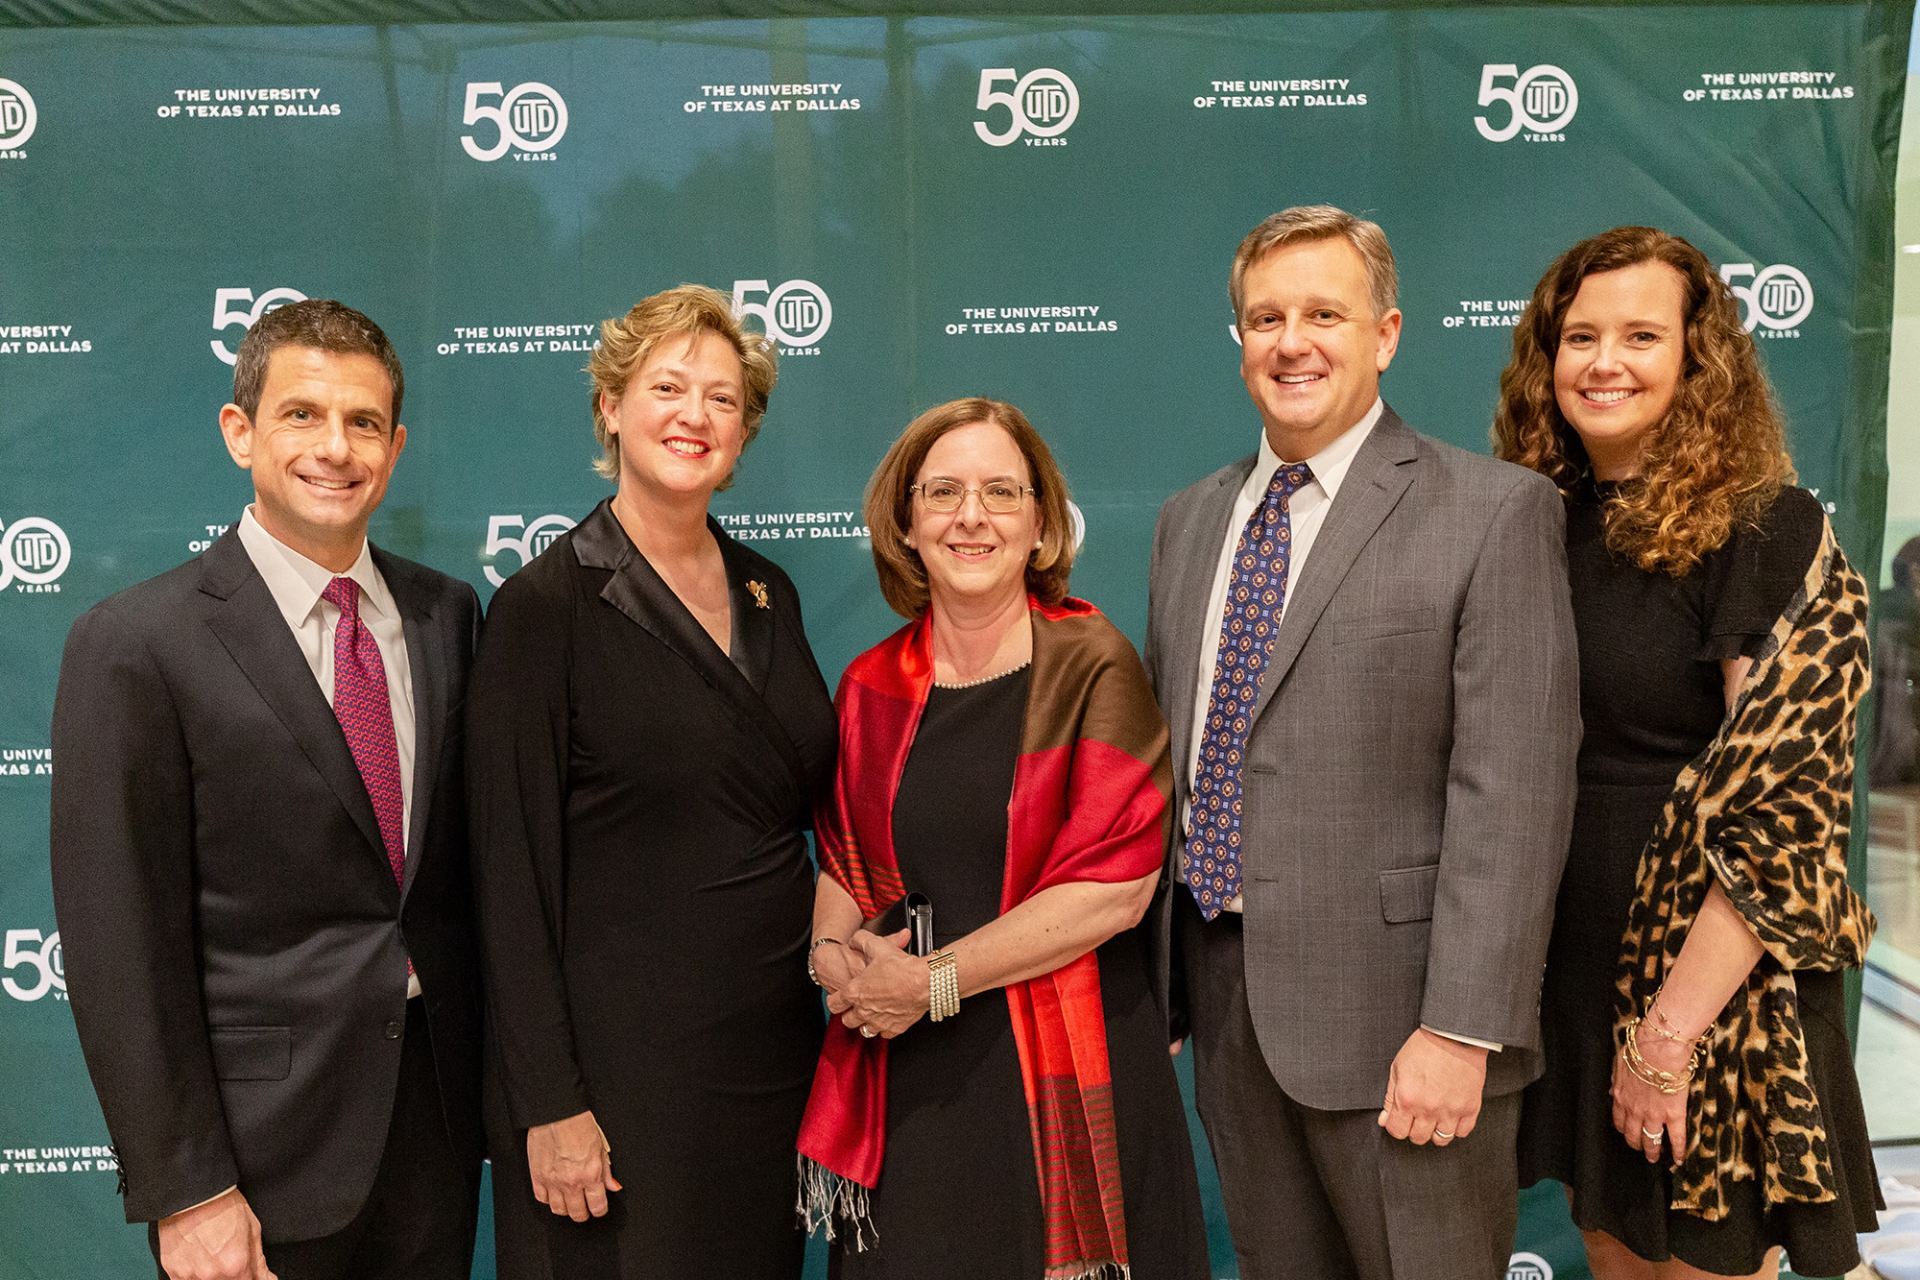 Dr. Inga Musselman (center), provost and vice president for academic affairs at UT Dallas, is pictured with members of the Ackerman family, (from left) Eddie Ackerman, Paula Menendez, David B. Ackerman and Samantha Ackerman Asch, at the Ackerman Center Leadership Award Dinner in 2019.